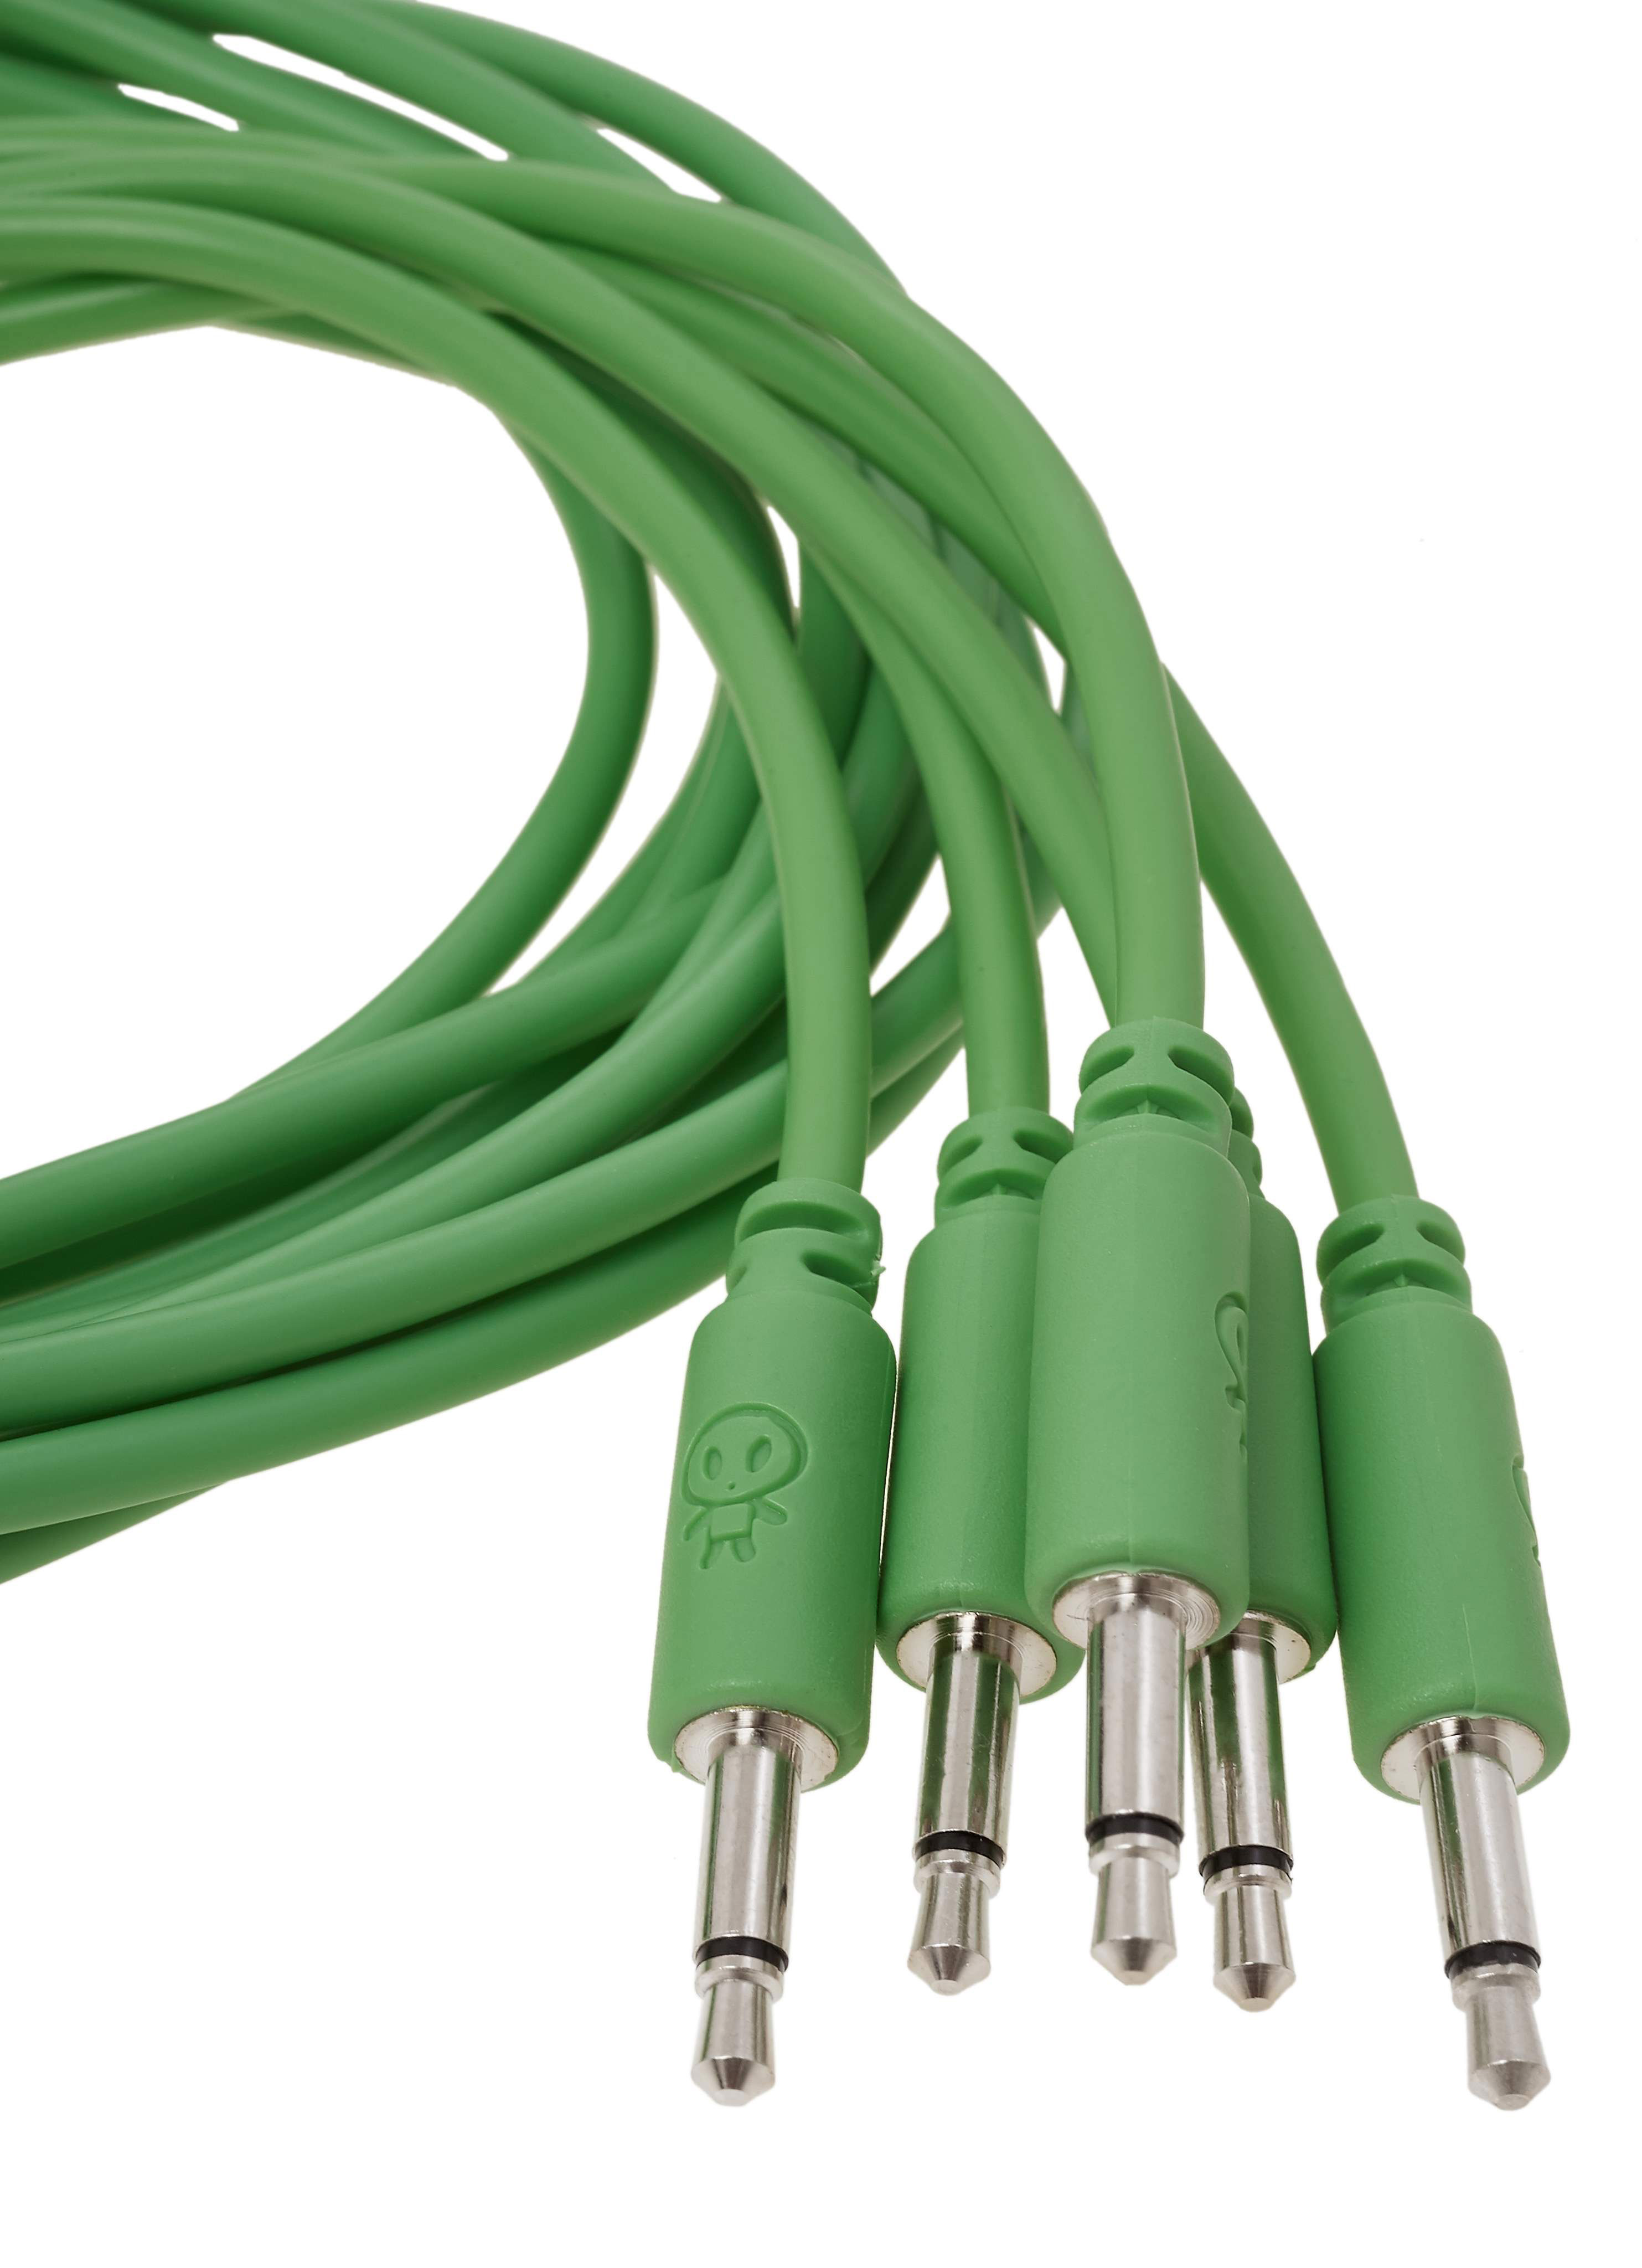 Erica Synths Eurorack Patch Cables 10cm, 5 Pcs Green по цене 830 ₽